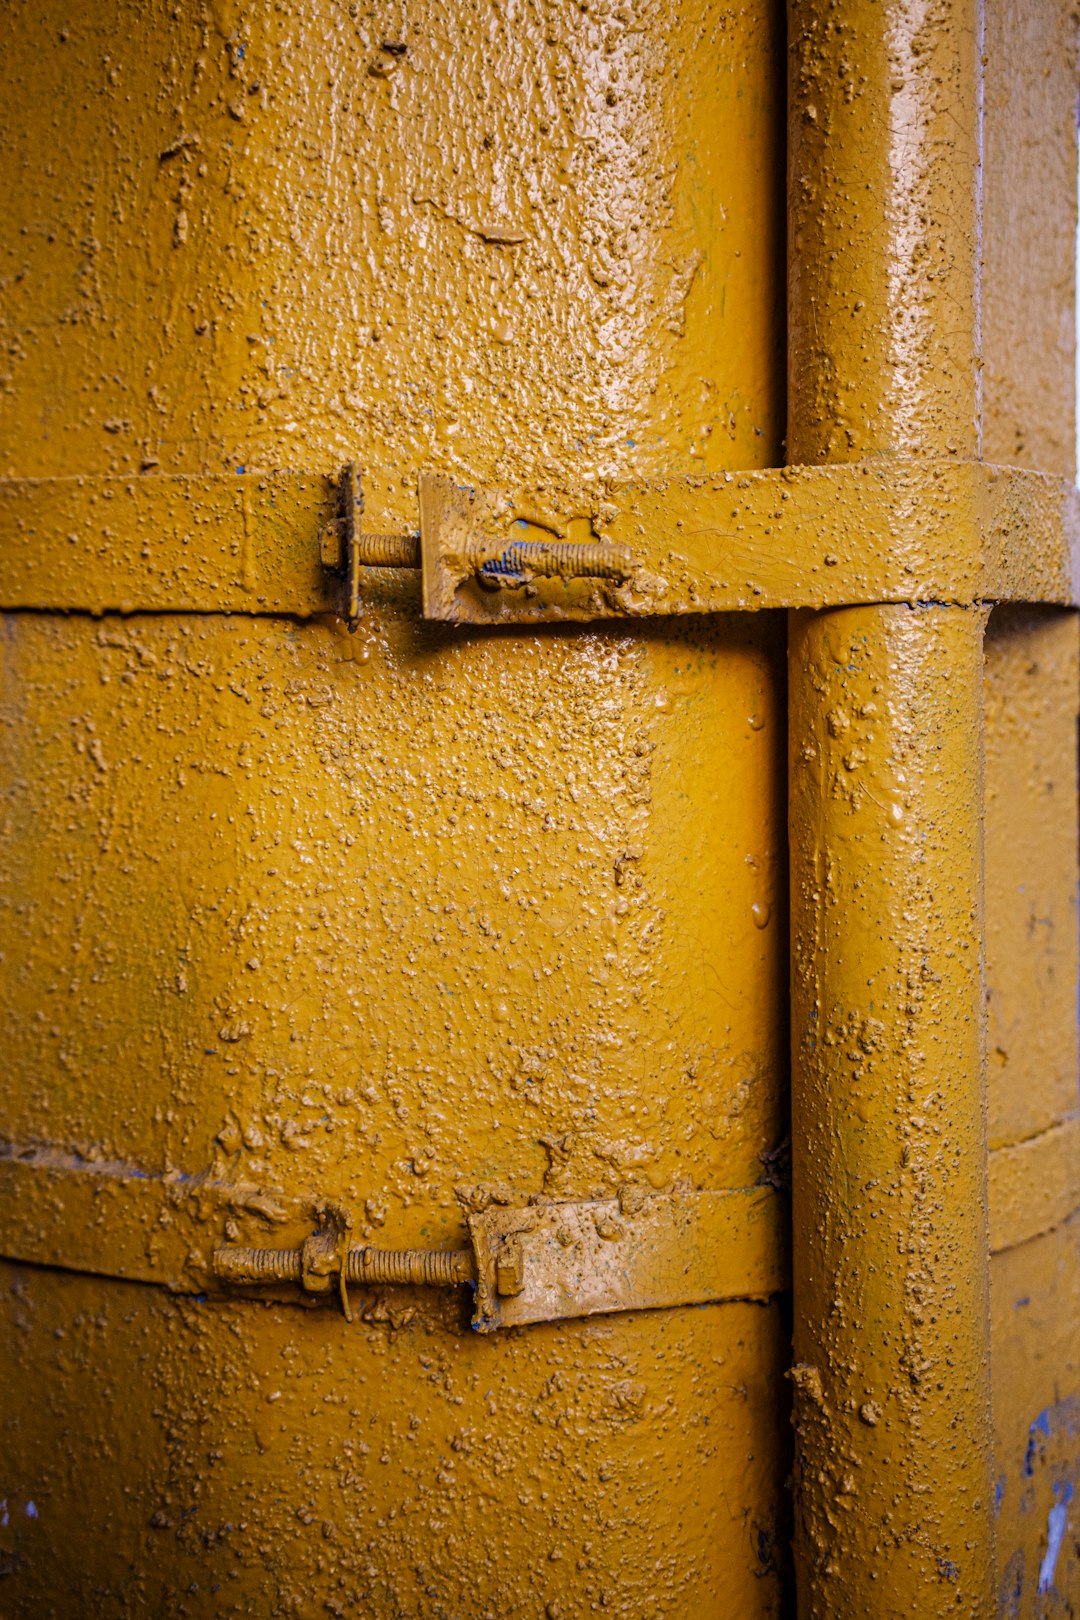 yellow metal container